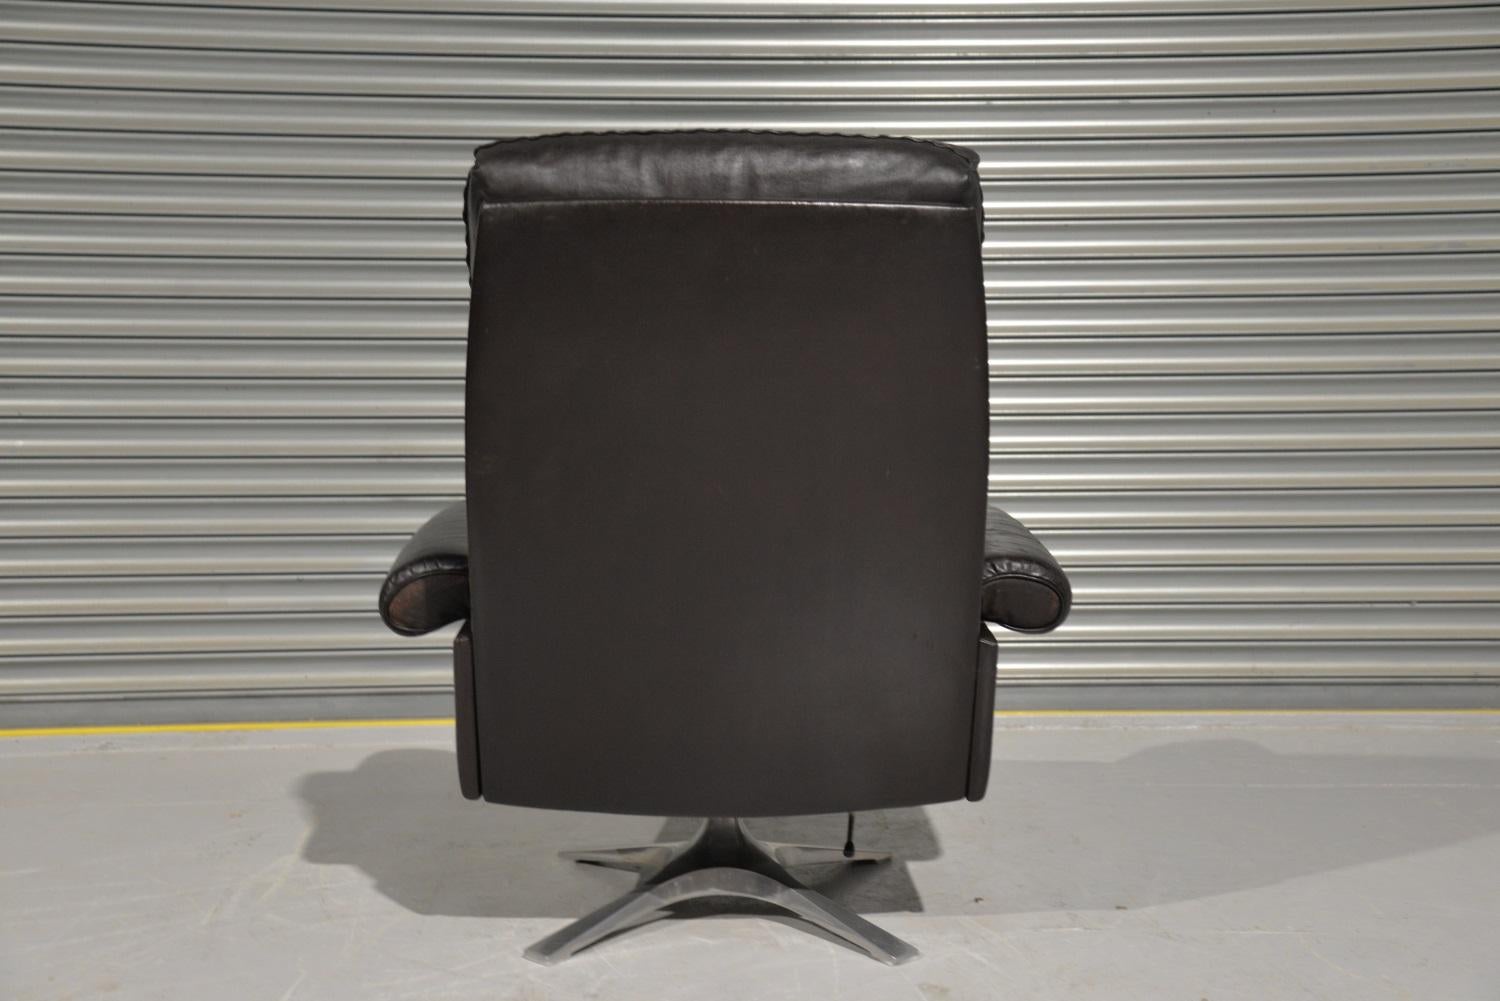 Vintage De Sede DS 31 High Back Leather Swivel Armchair with Ottoman, 1970s For Sale 2